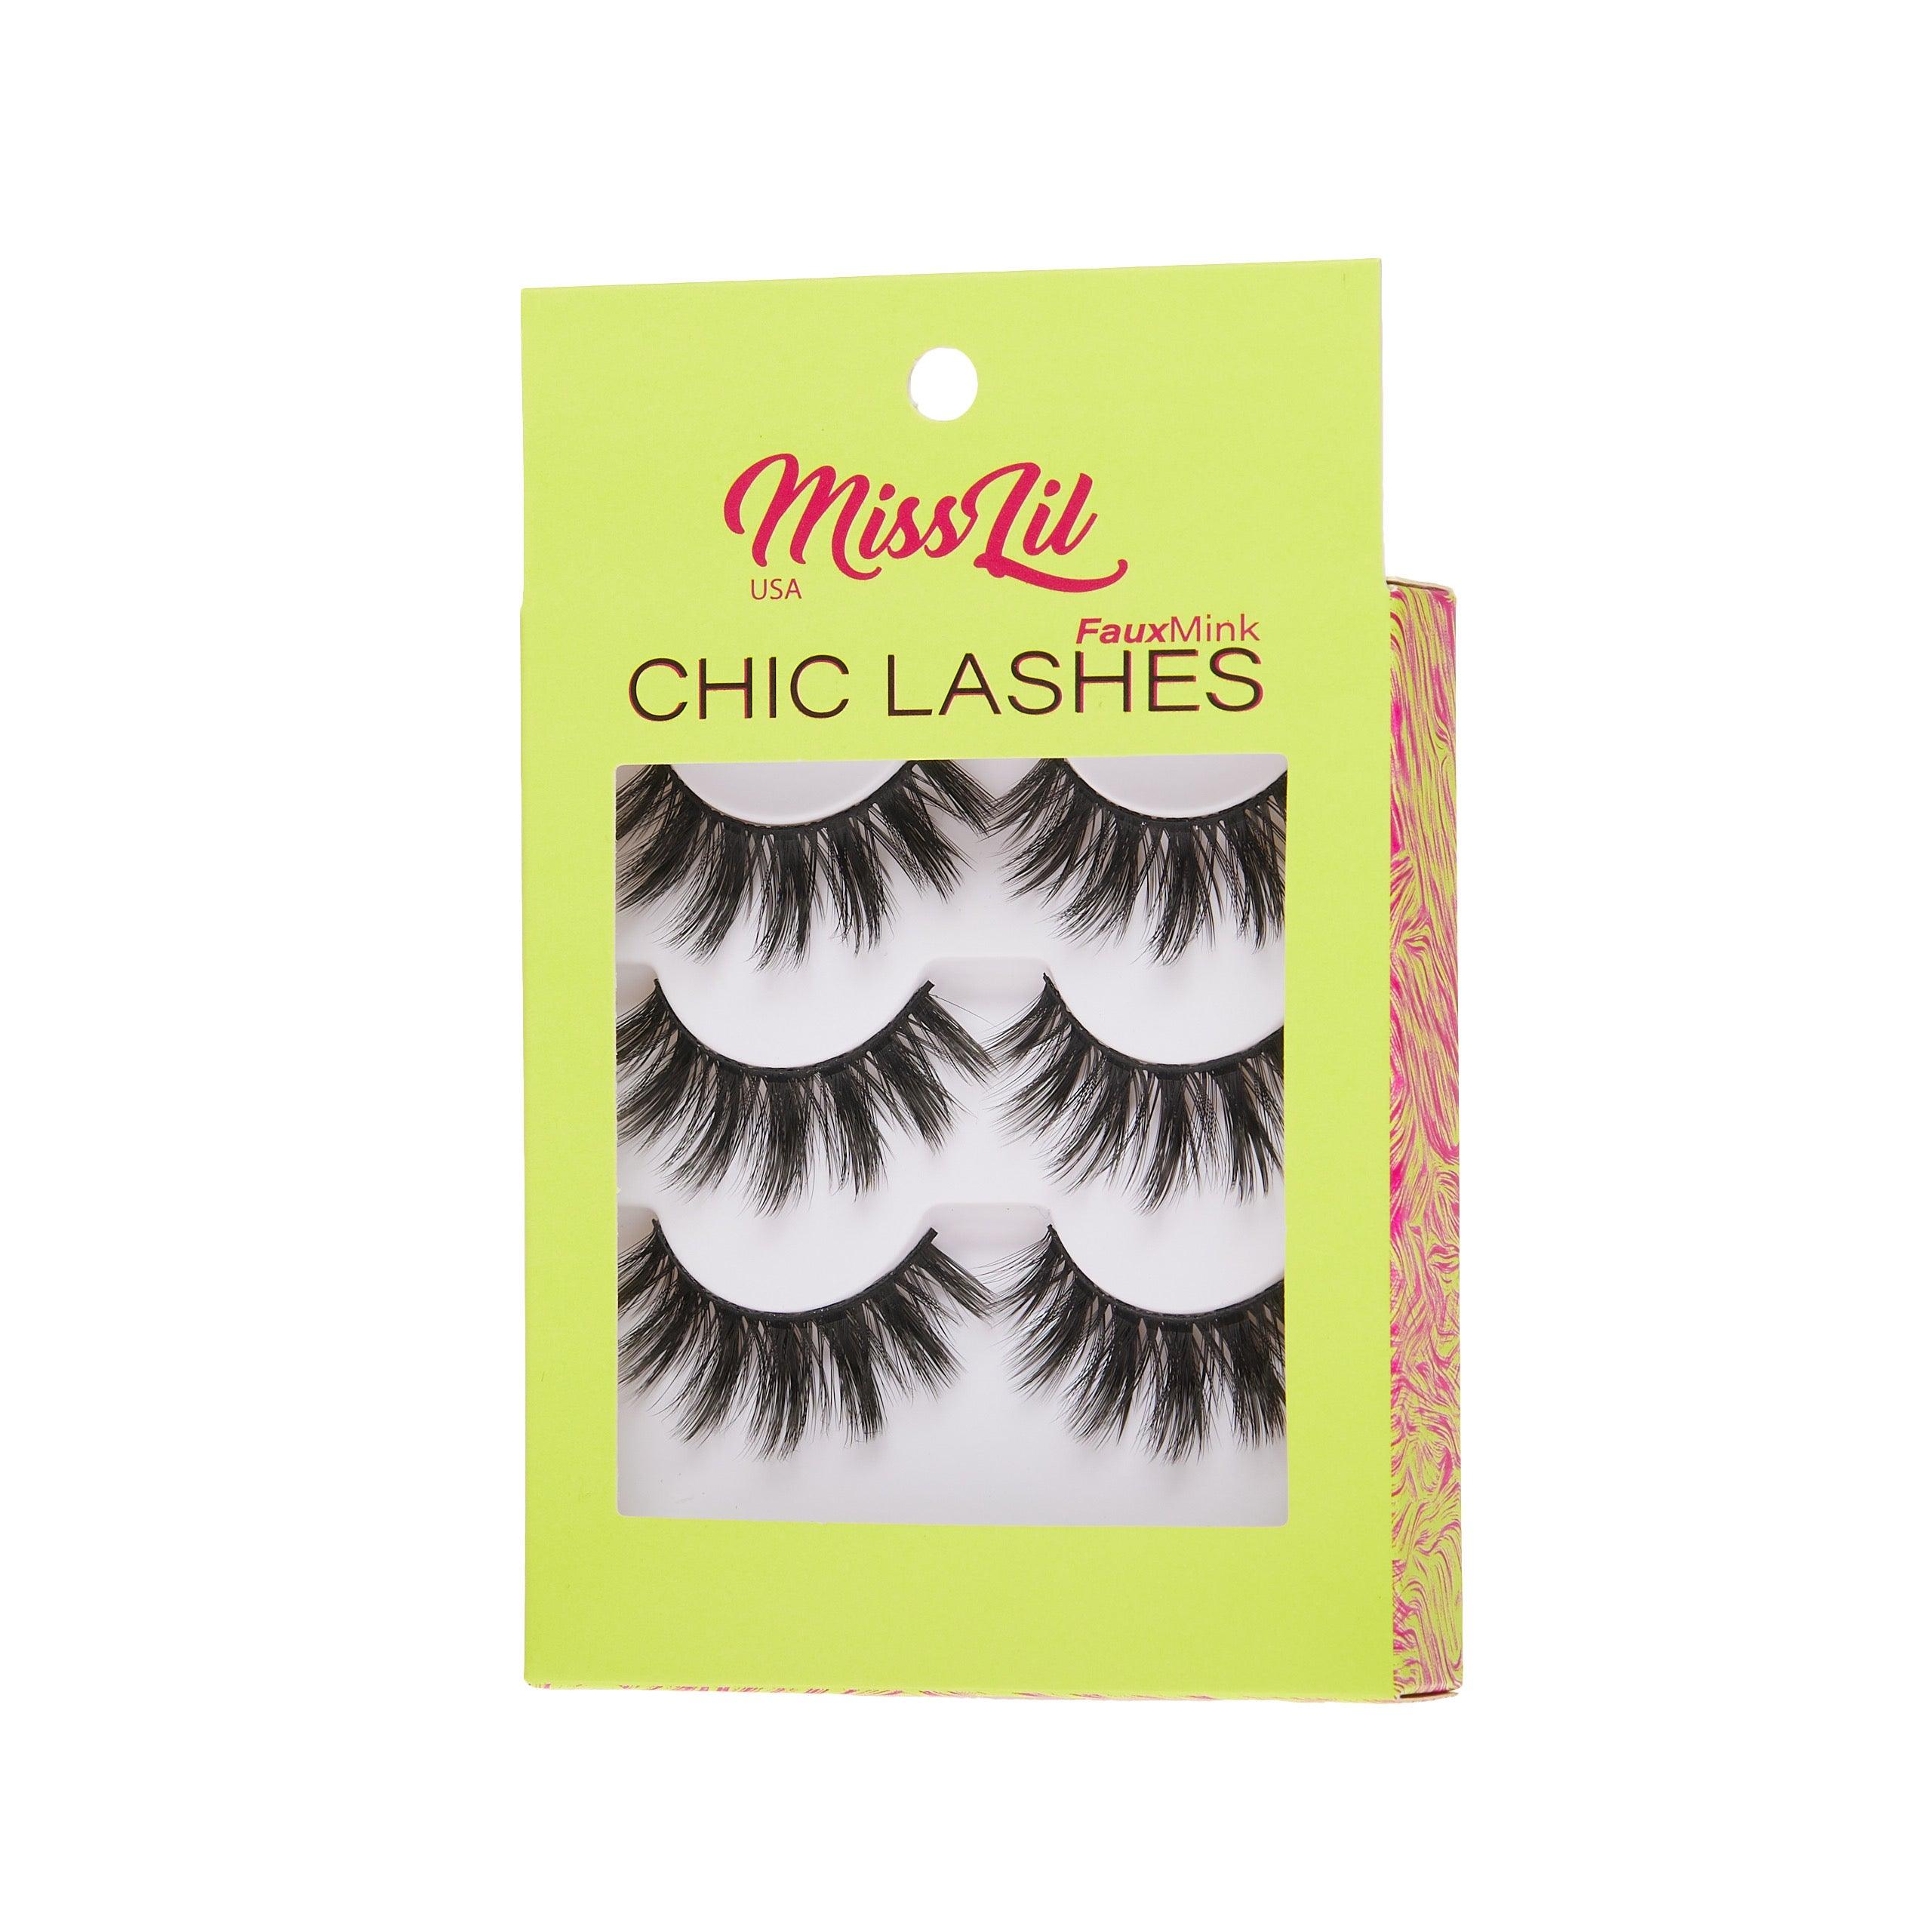 3-Pair Faux Mink Eyelashes - Chic Lashes Collection #22 - Pack of 3 - Miss Lil USA